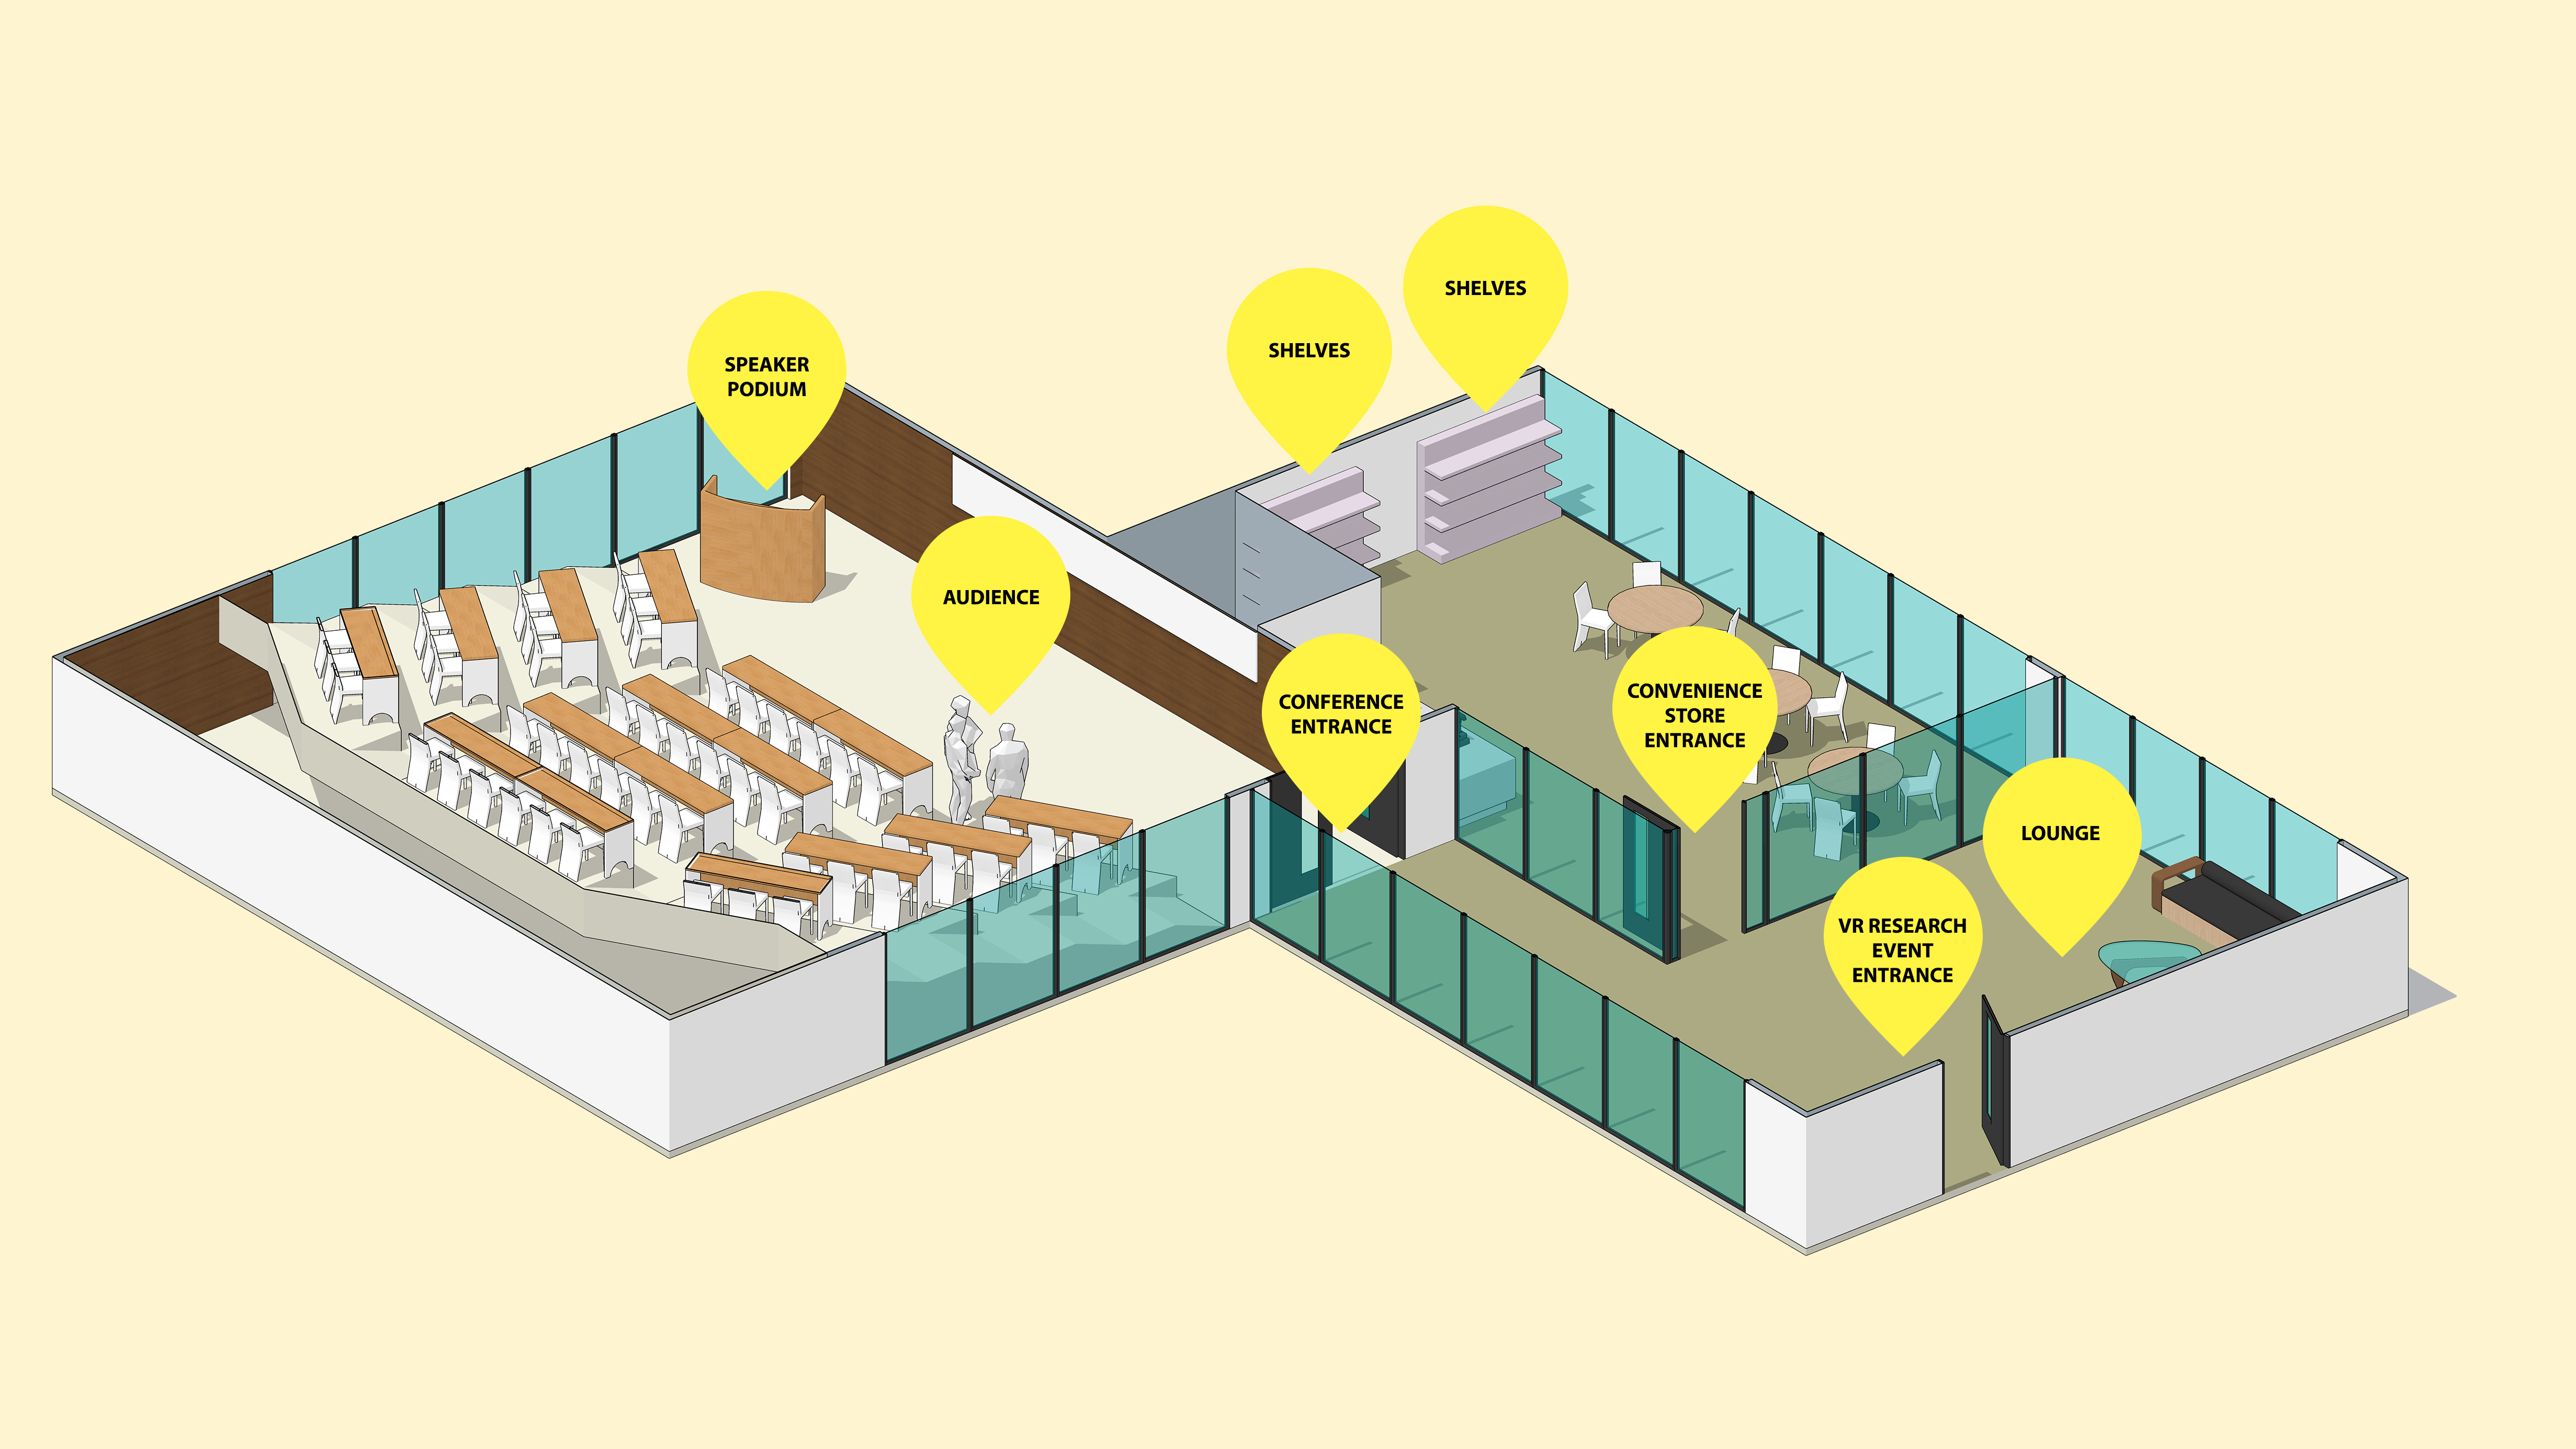 Same event floor plan displayed in an isometric view.